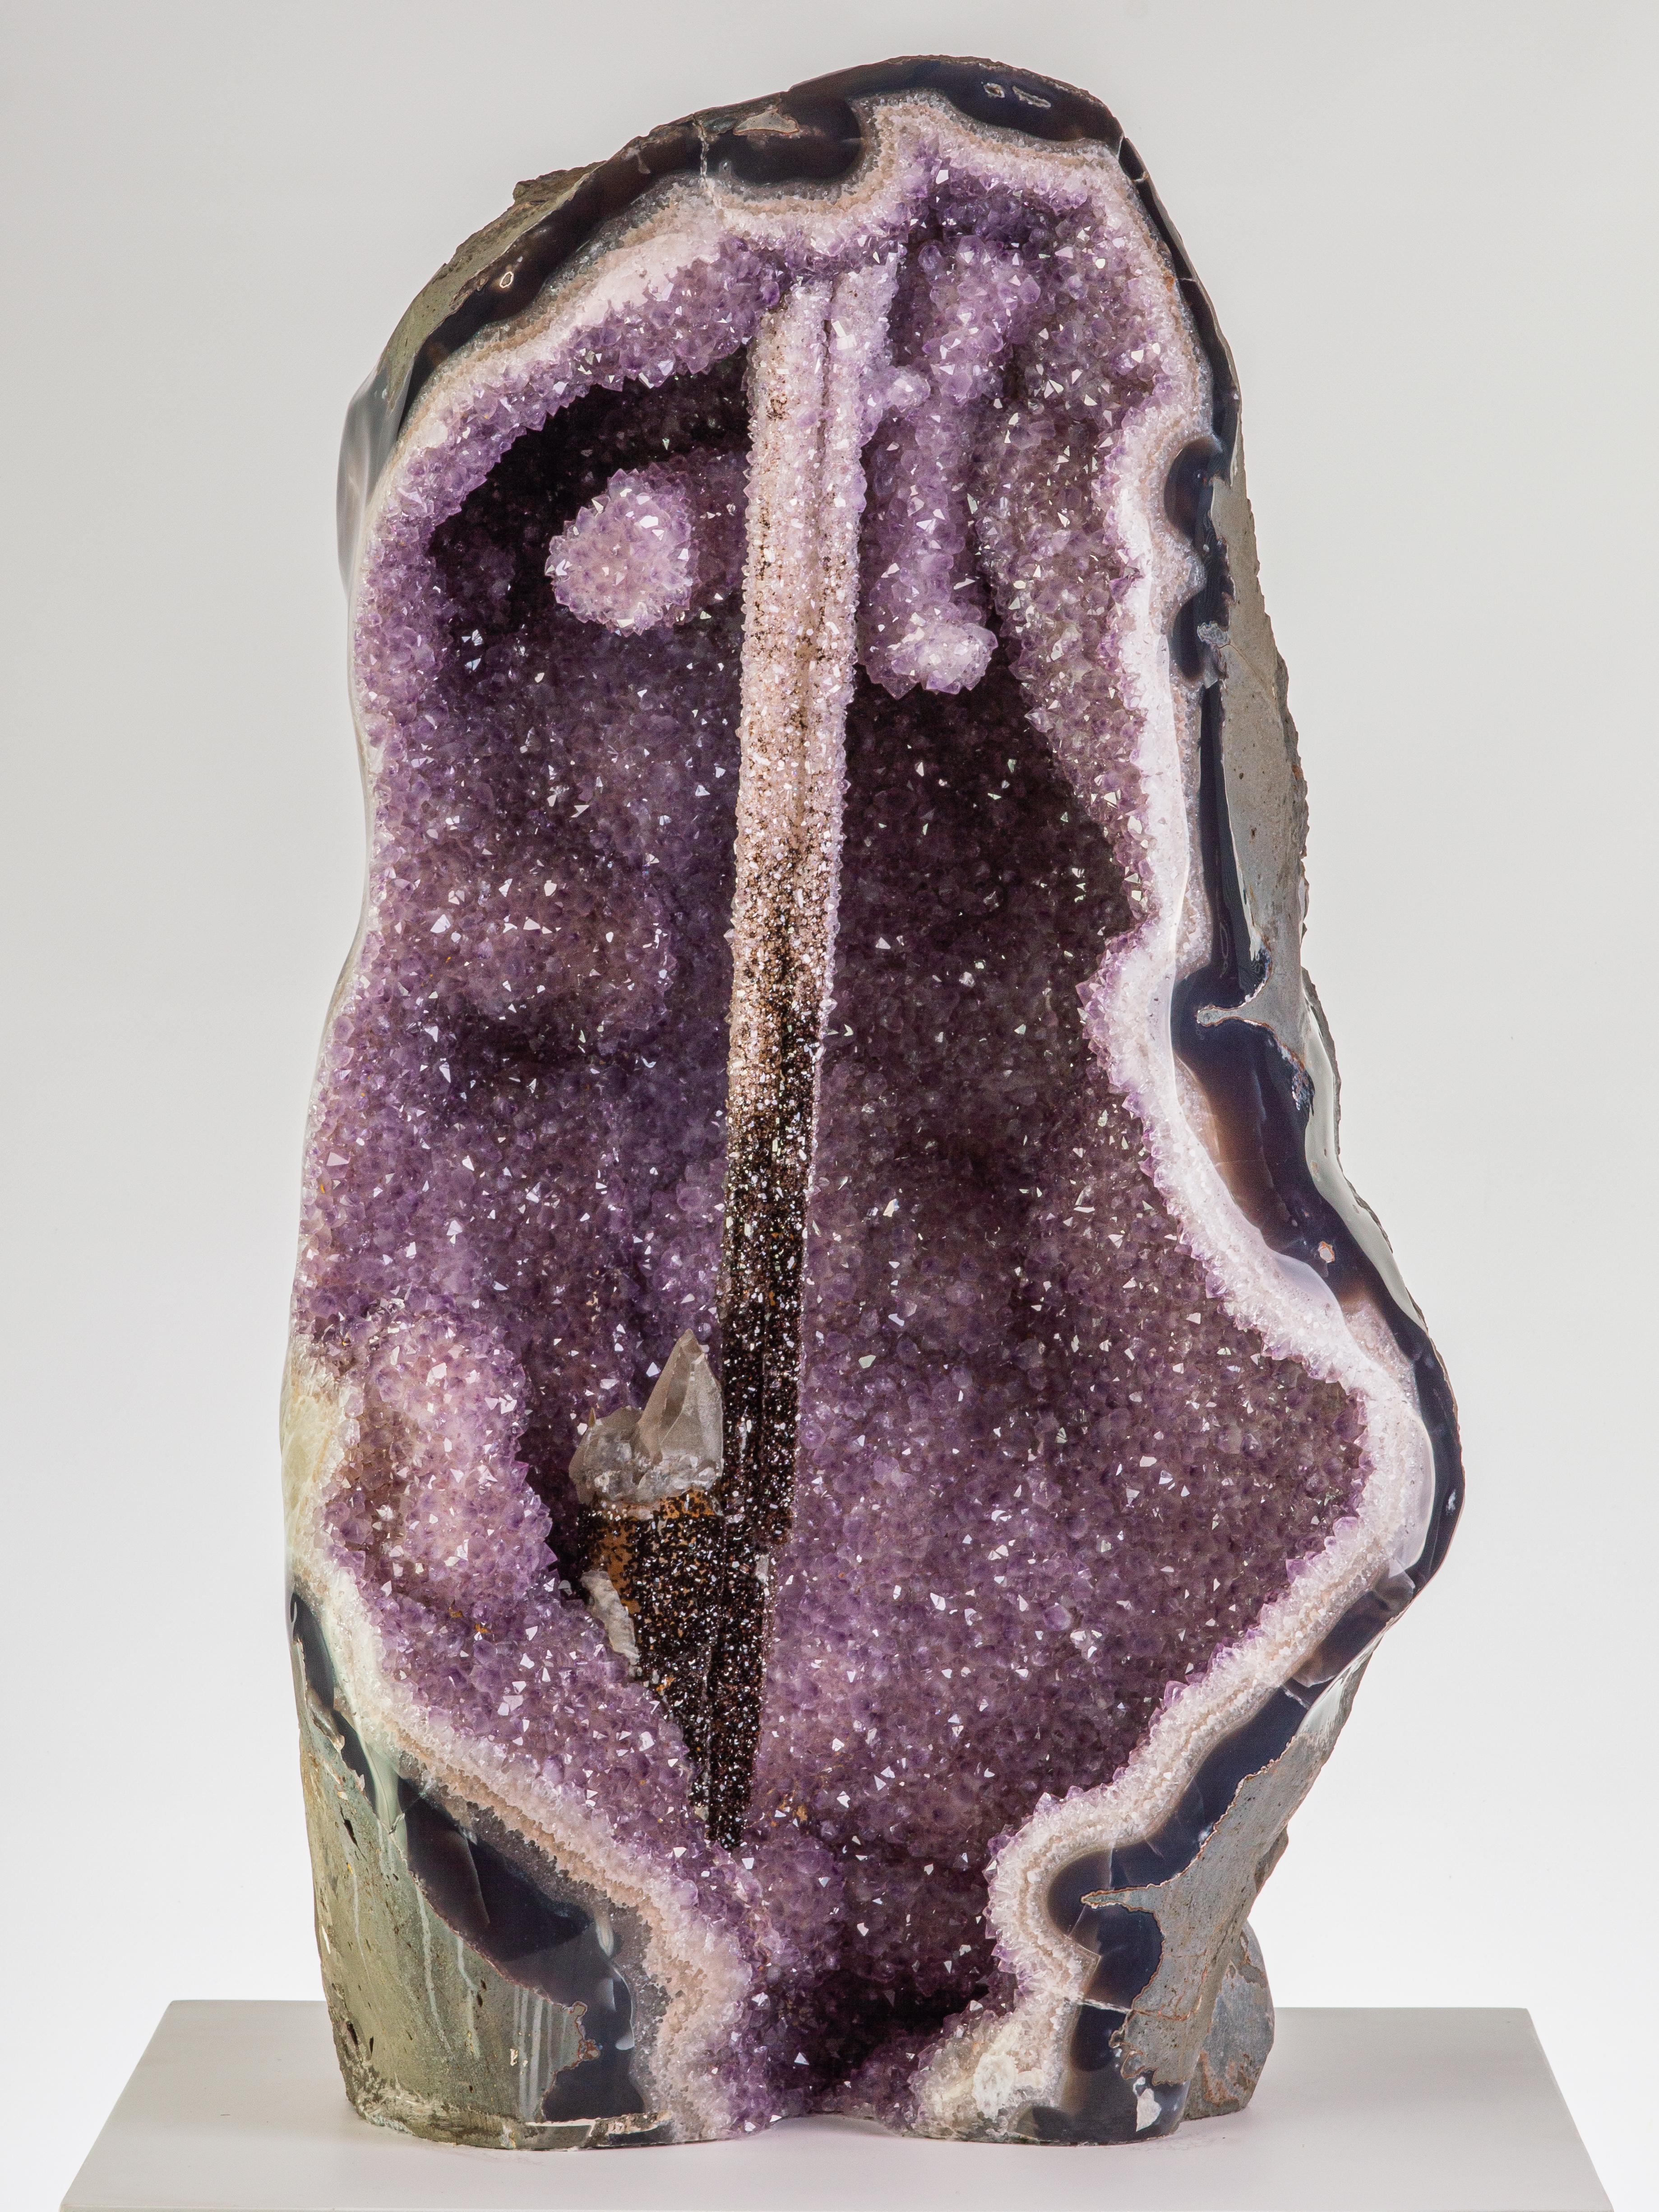 With its extremely unusual central amethyst epimorph after calcite, this natural
wonder evokes images of the legendary sword, Excalibur, magically fixed in
the stone. Elsewhere we see quartz-frosted calcite, goethite and amethystine
quartz. An